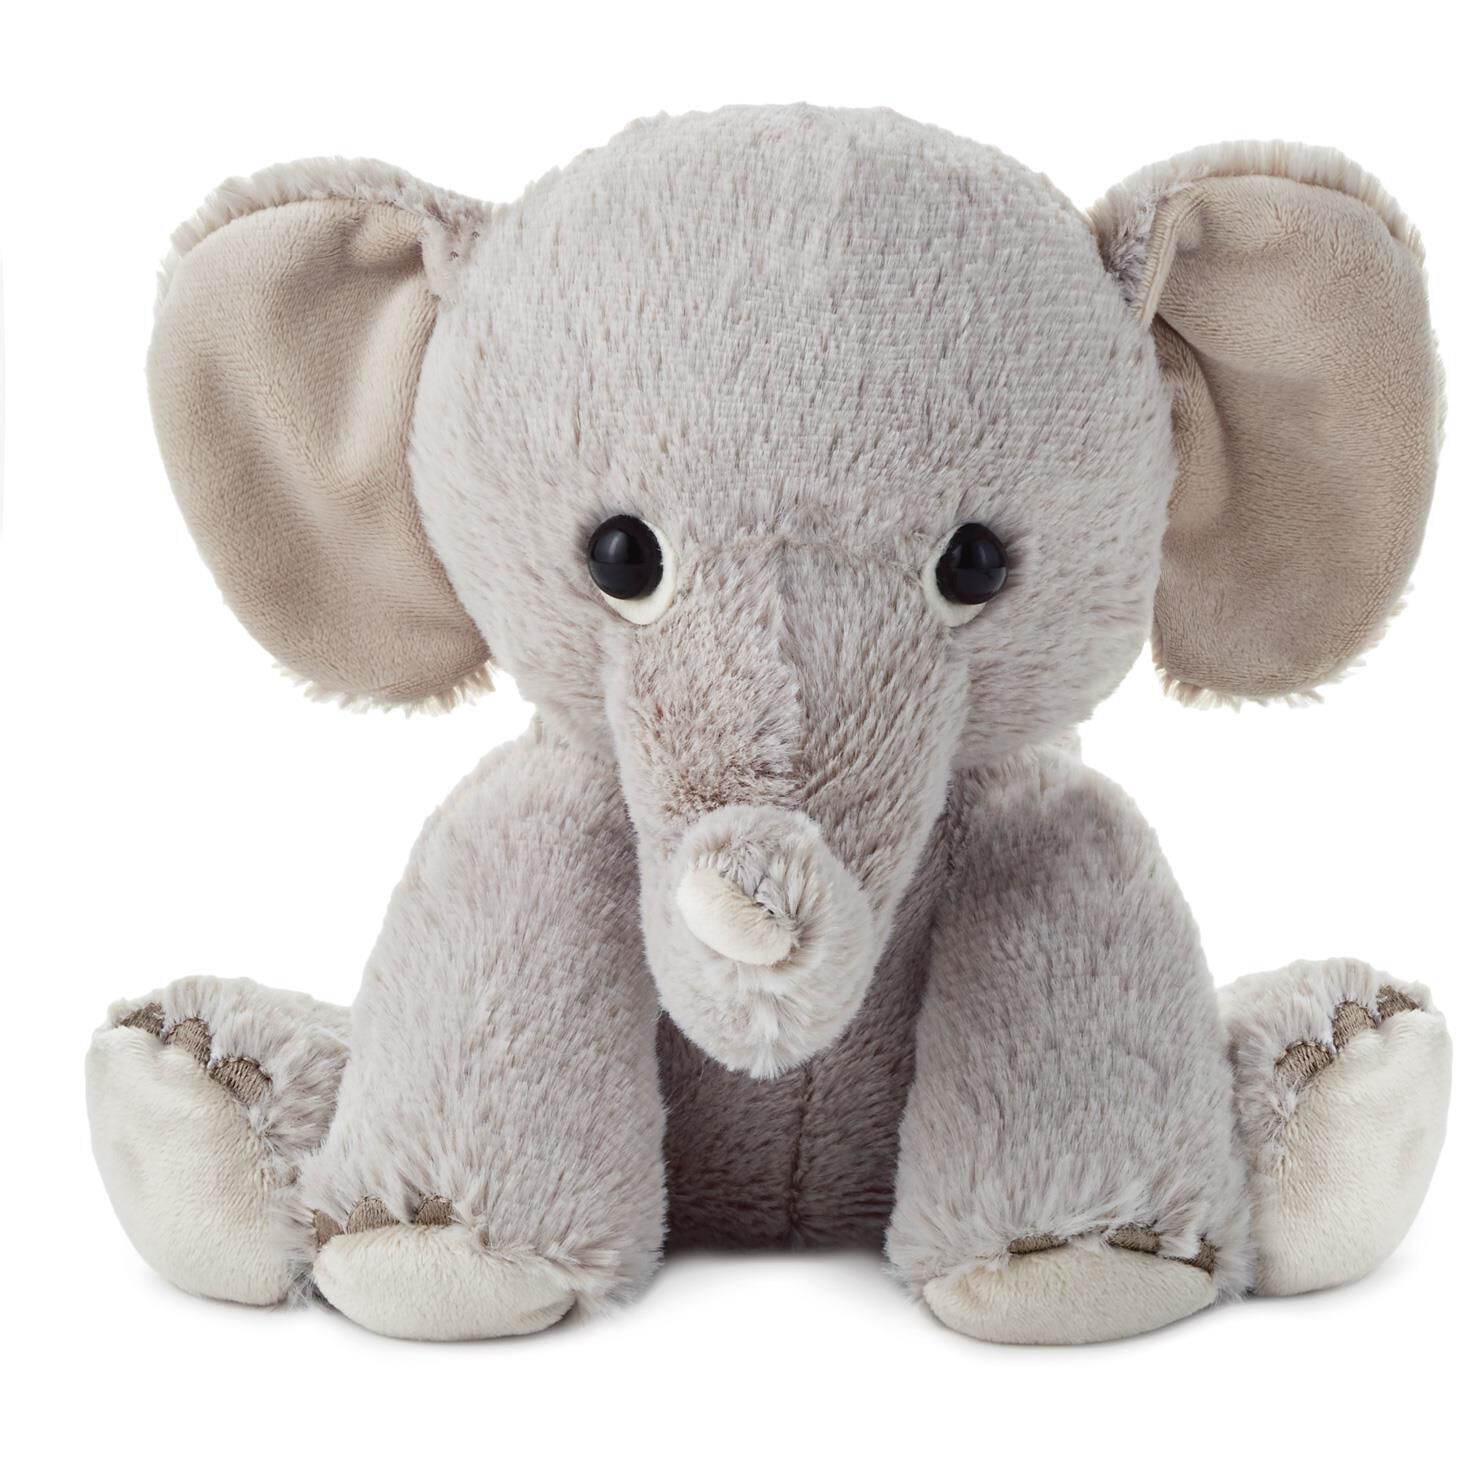 stuffed elephant toy for baby